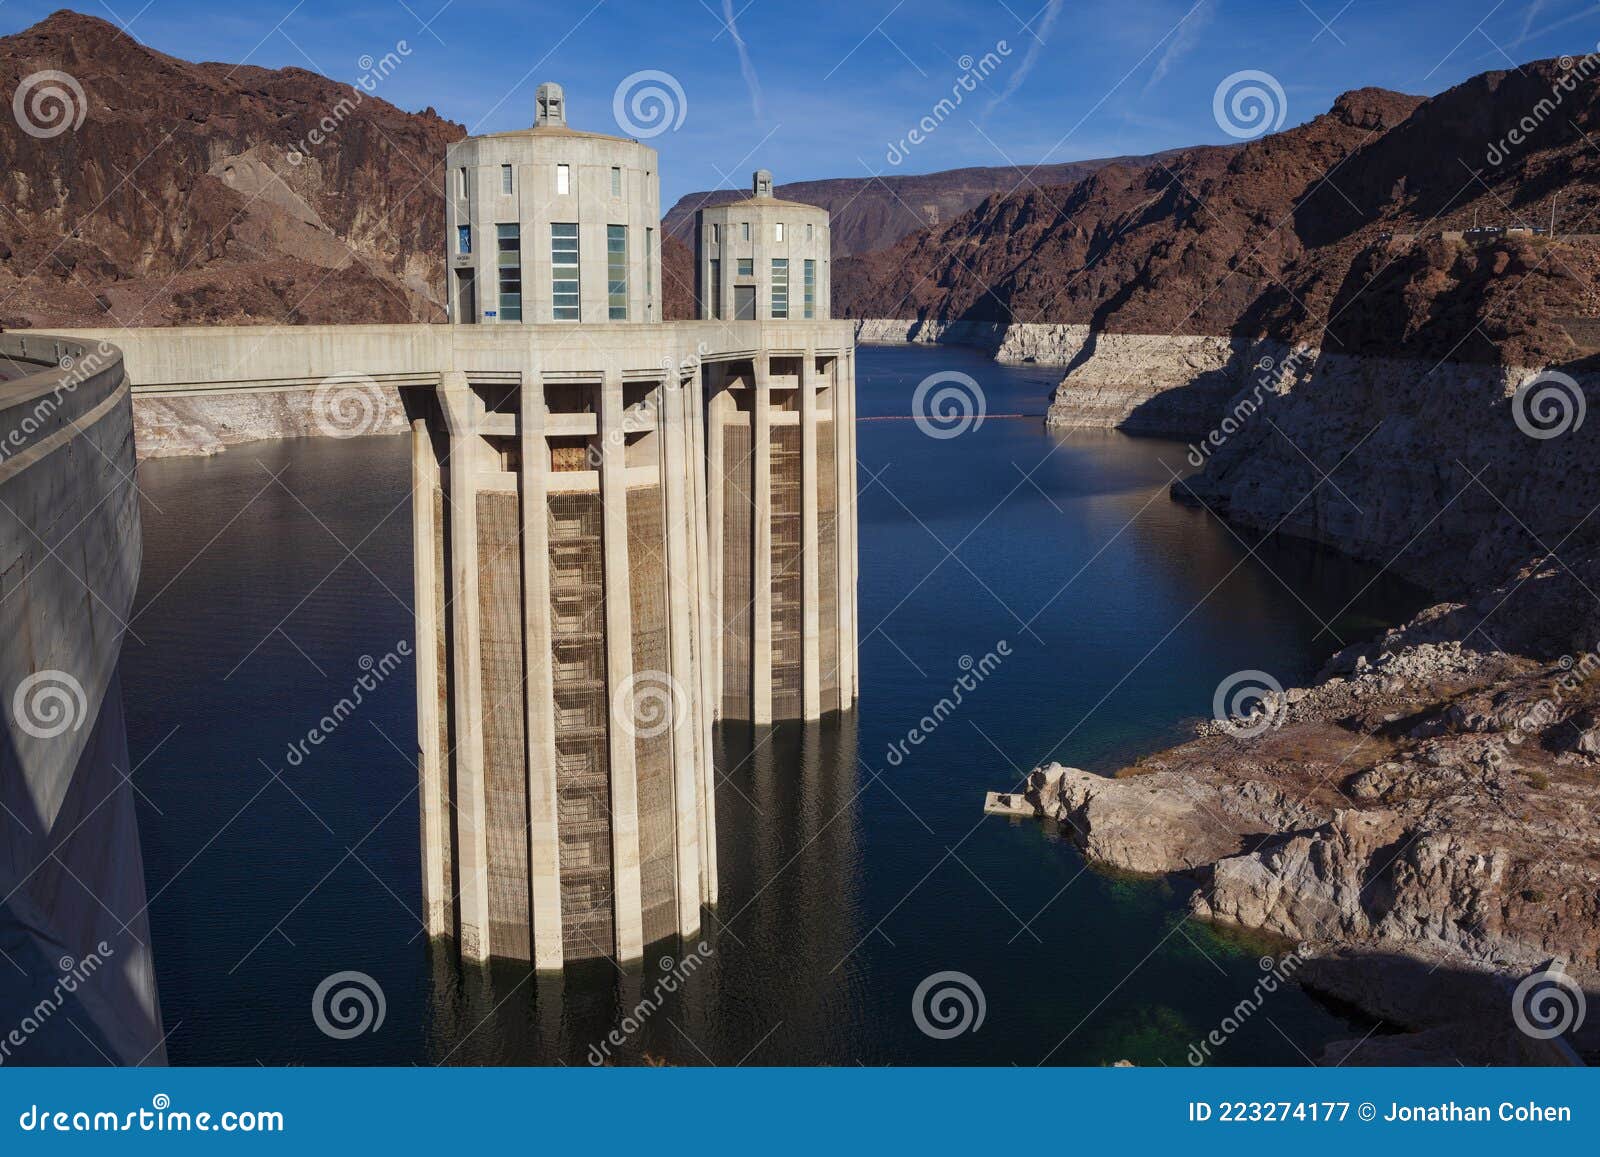 hoover dam reservoir at record low water levels, raising concerns about hydroelectric power